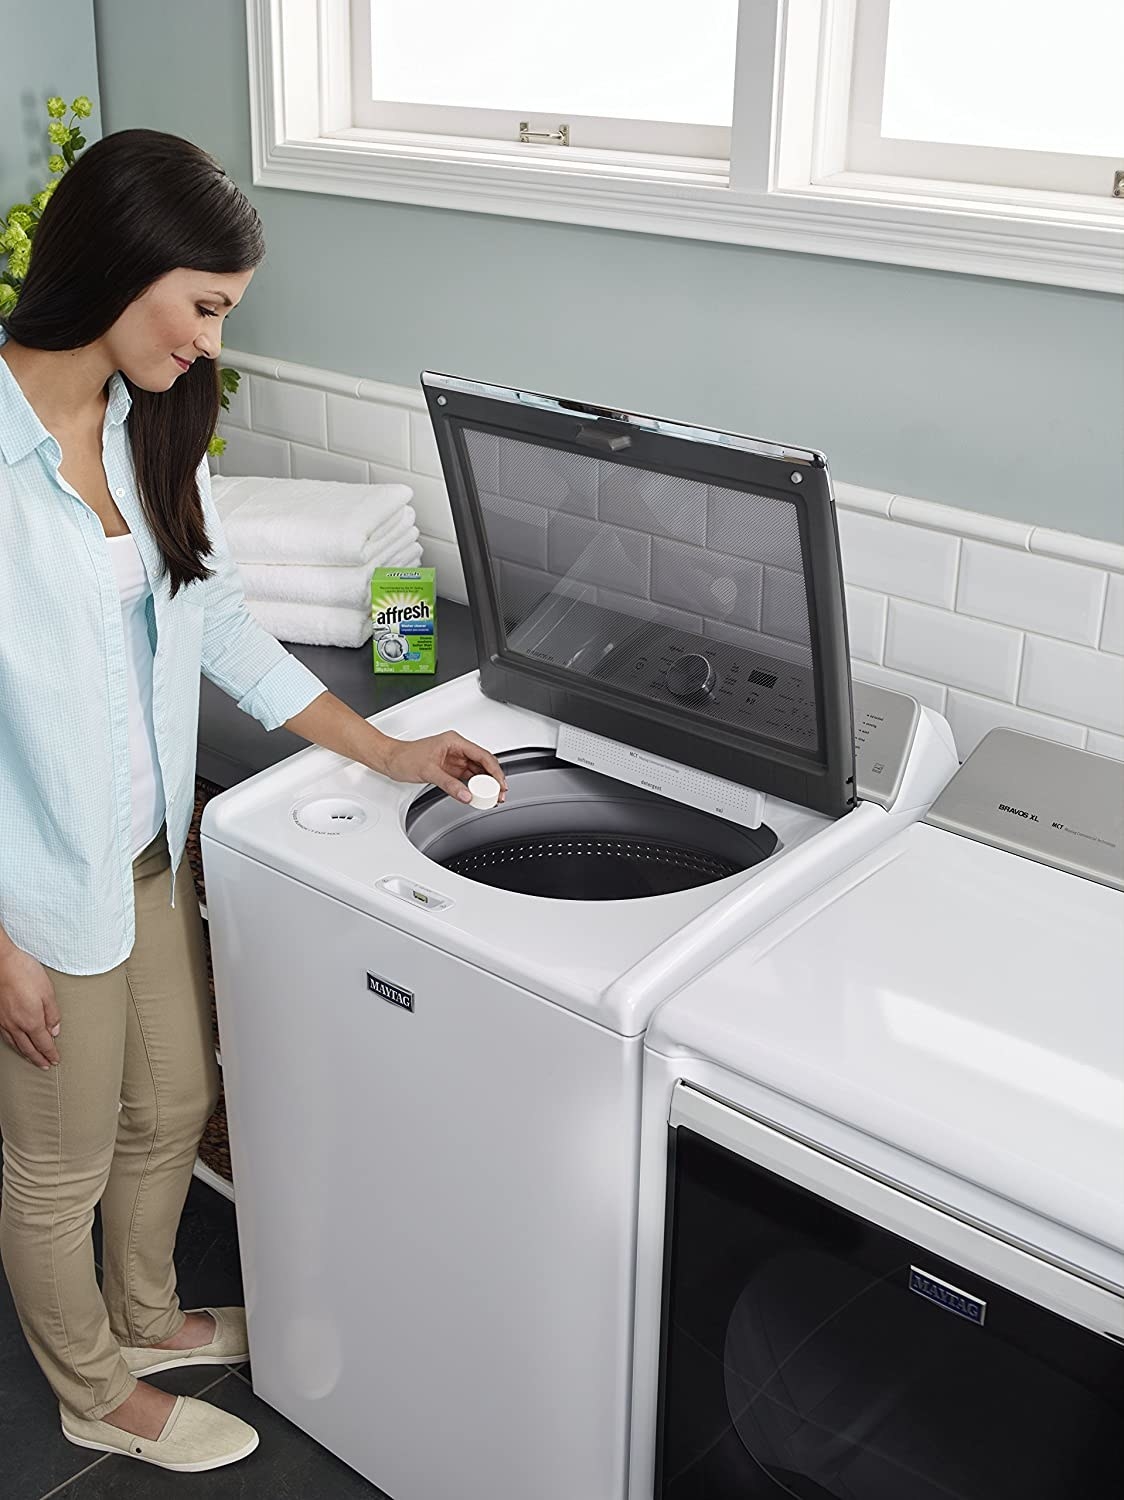 A person puts a tablet in the washer